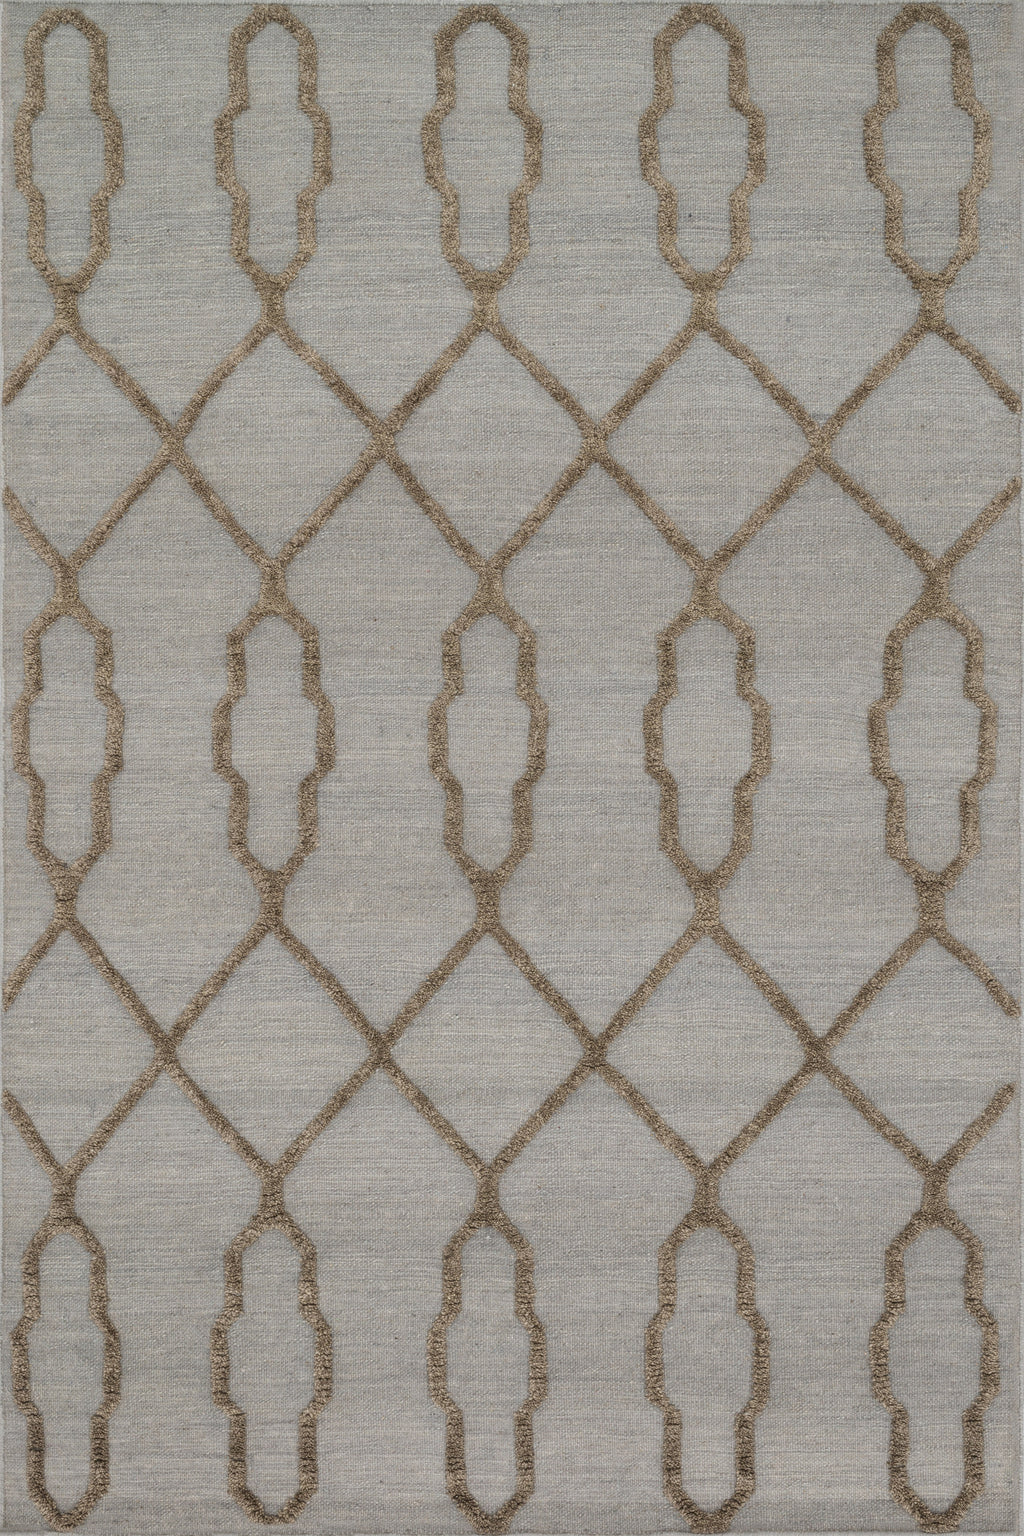 ADLER Collection Wool Rug  in  SLATE Gray Small Hand-Woven Wool